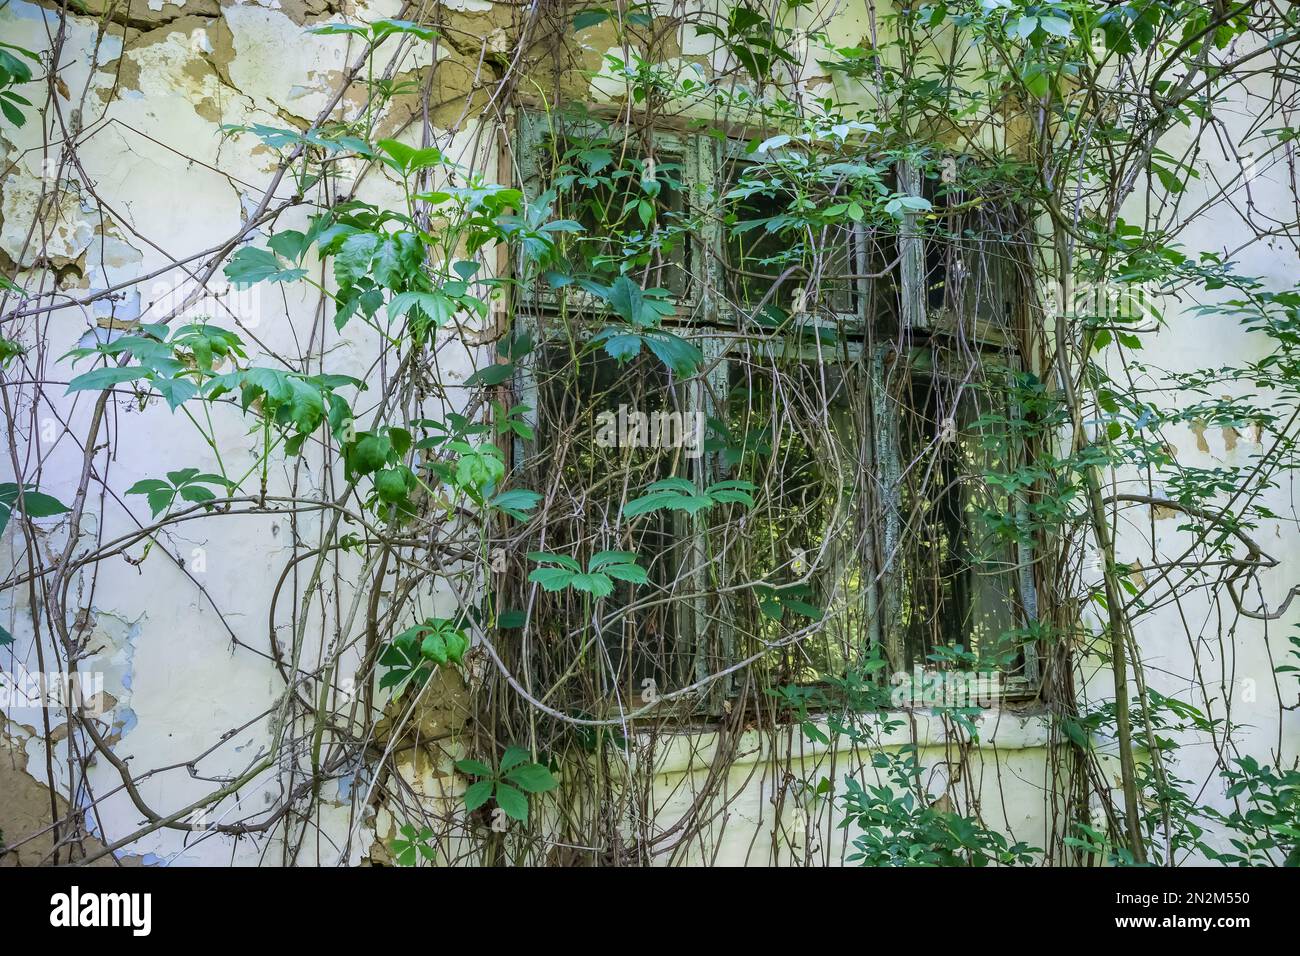 window in an abandoned house cracked vegetation Stock Photo